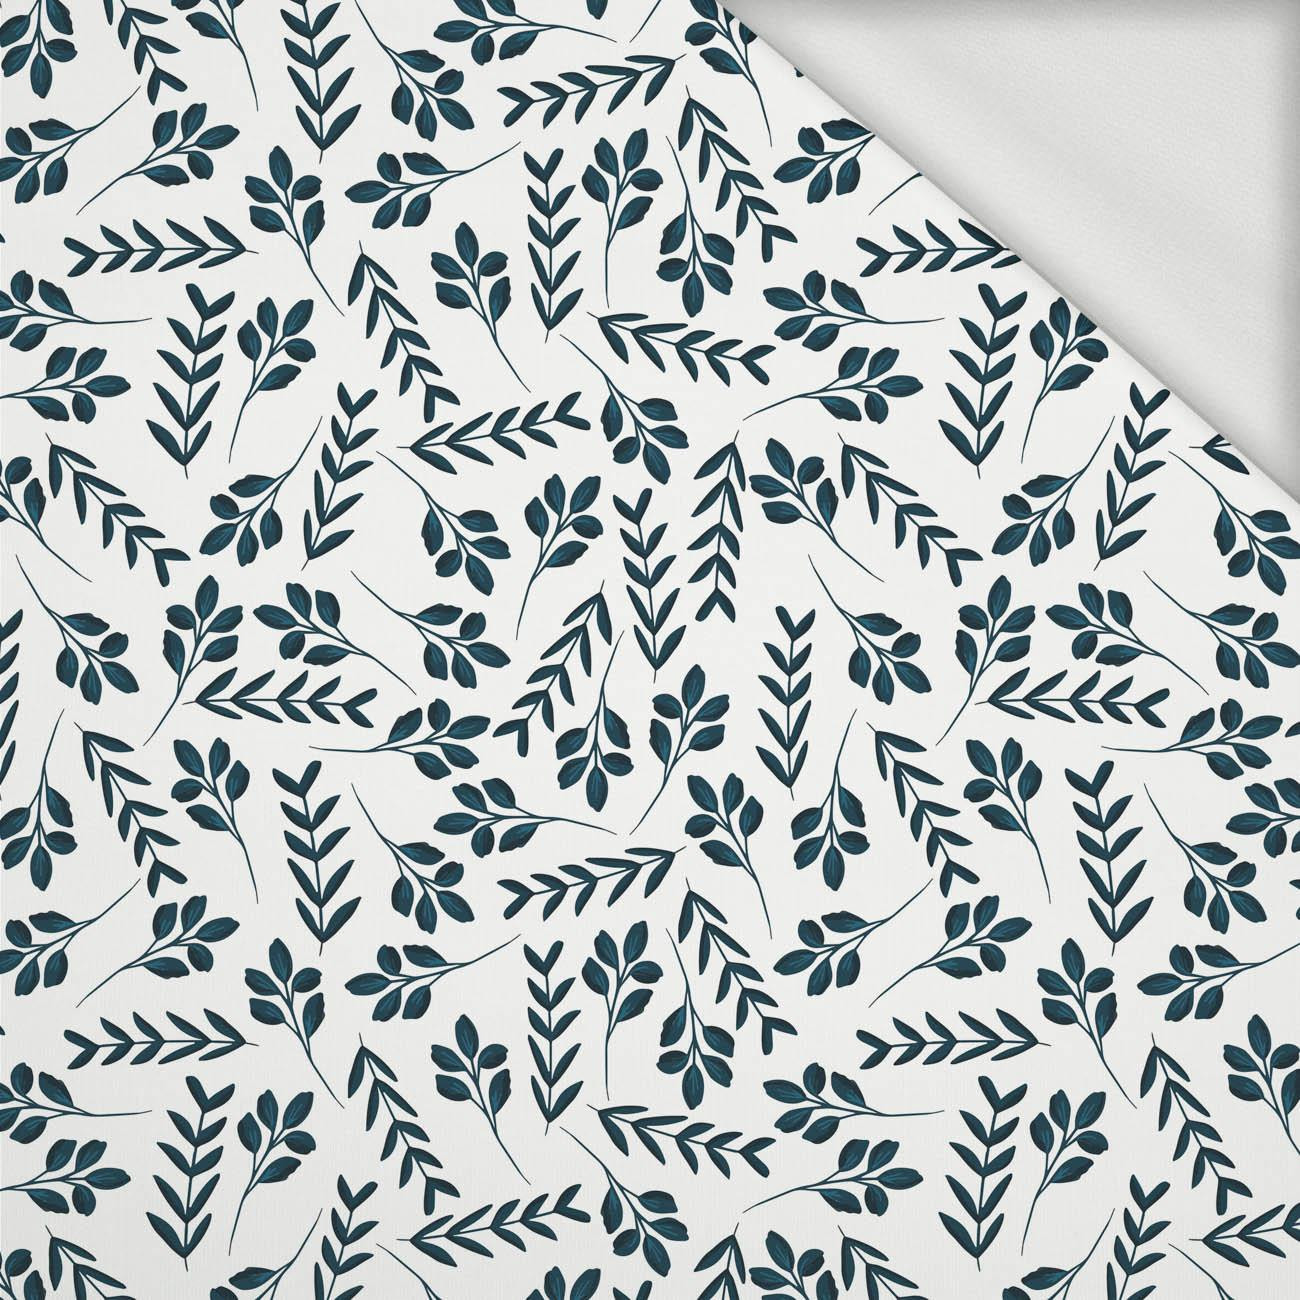 SMALL LEAVES pat. 2 / white - looped knit fabric